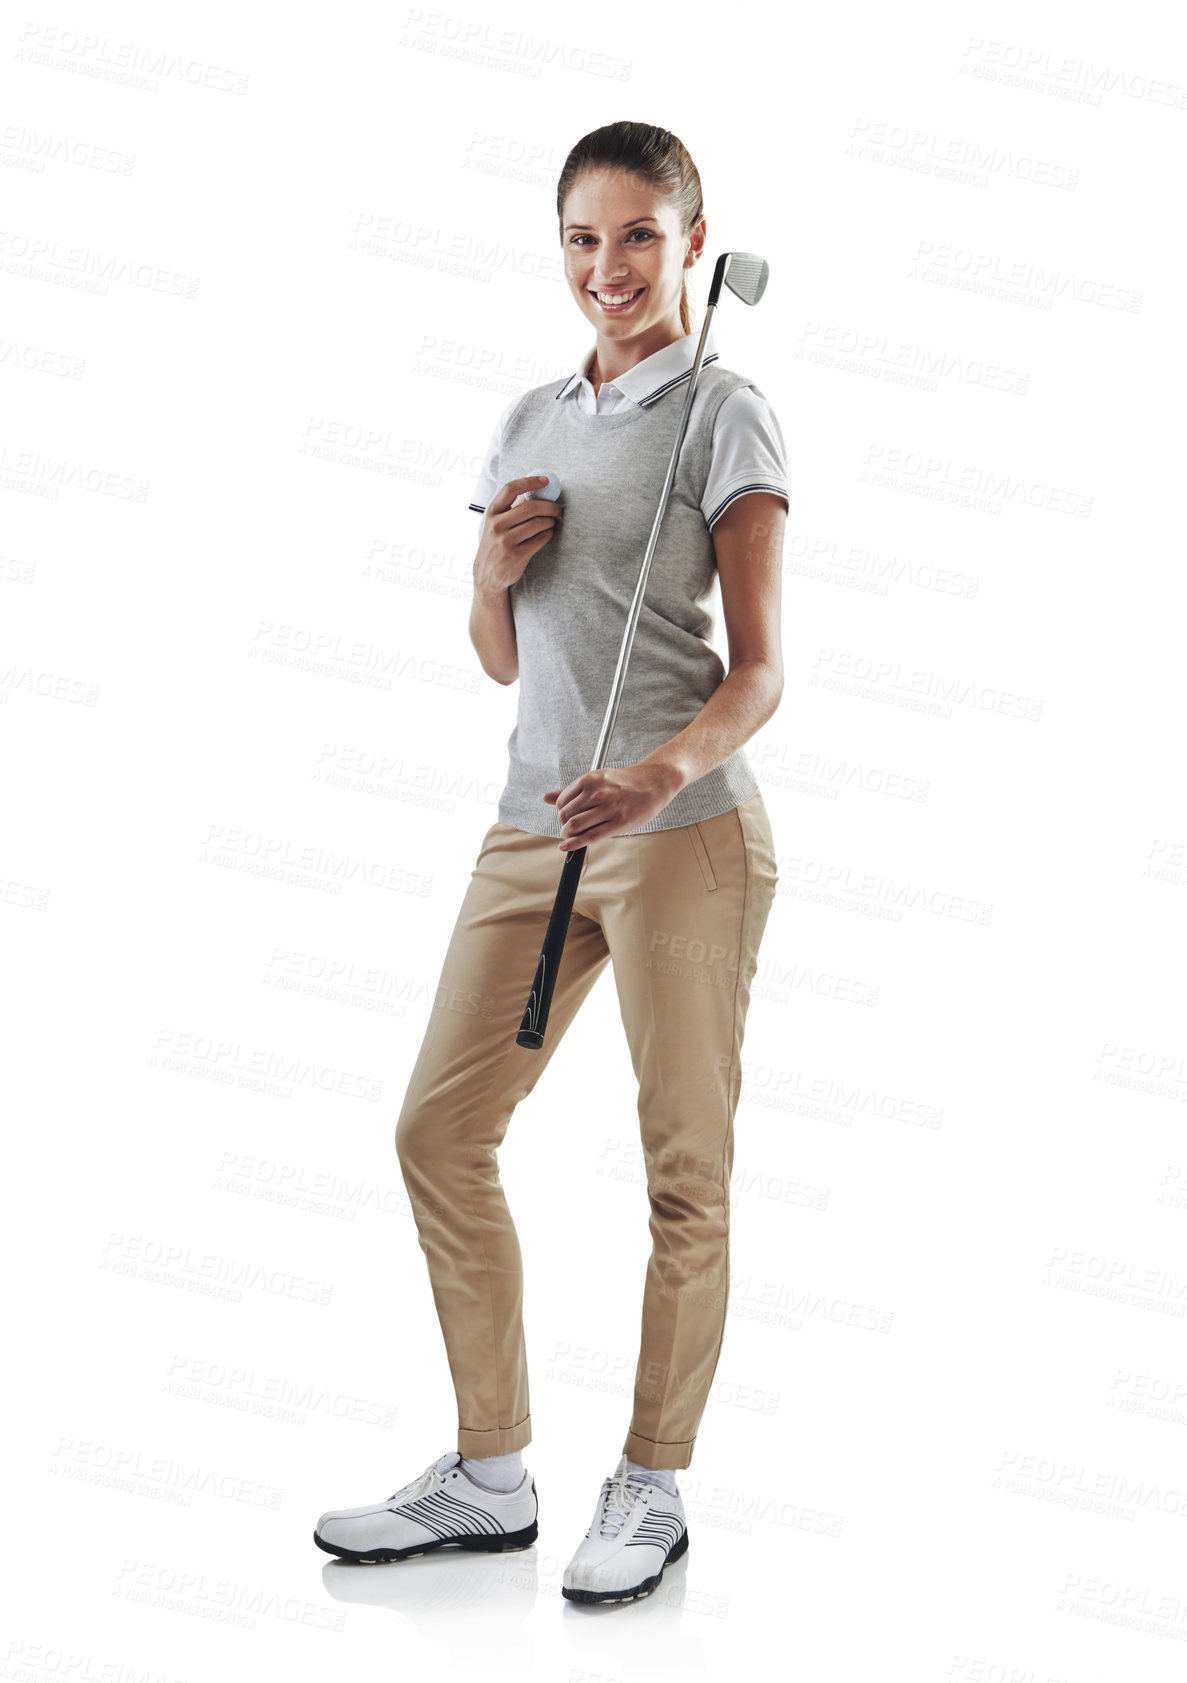 Buy stock photo Studio shot of a young golfer holding a golf ball and iron club isolated on white